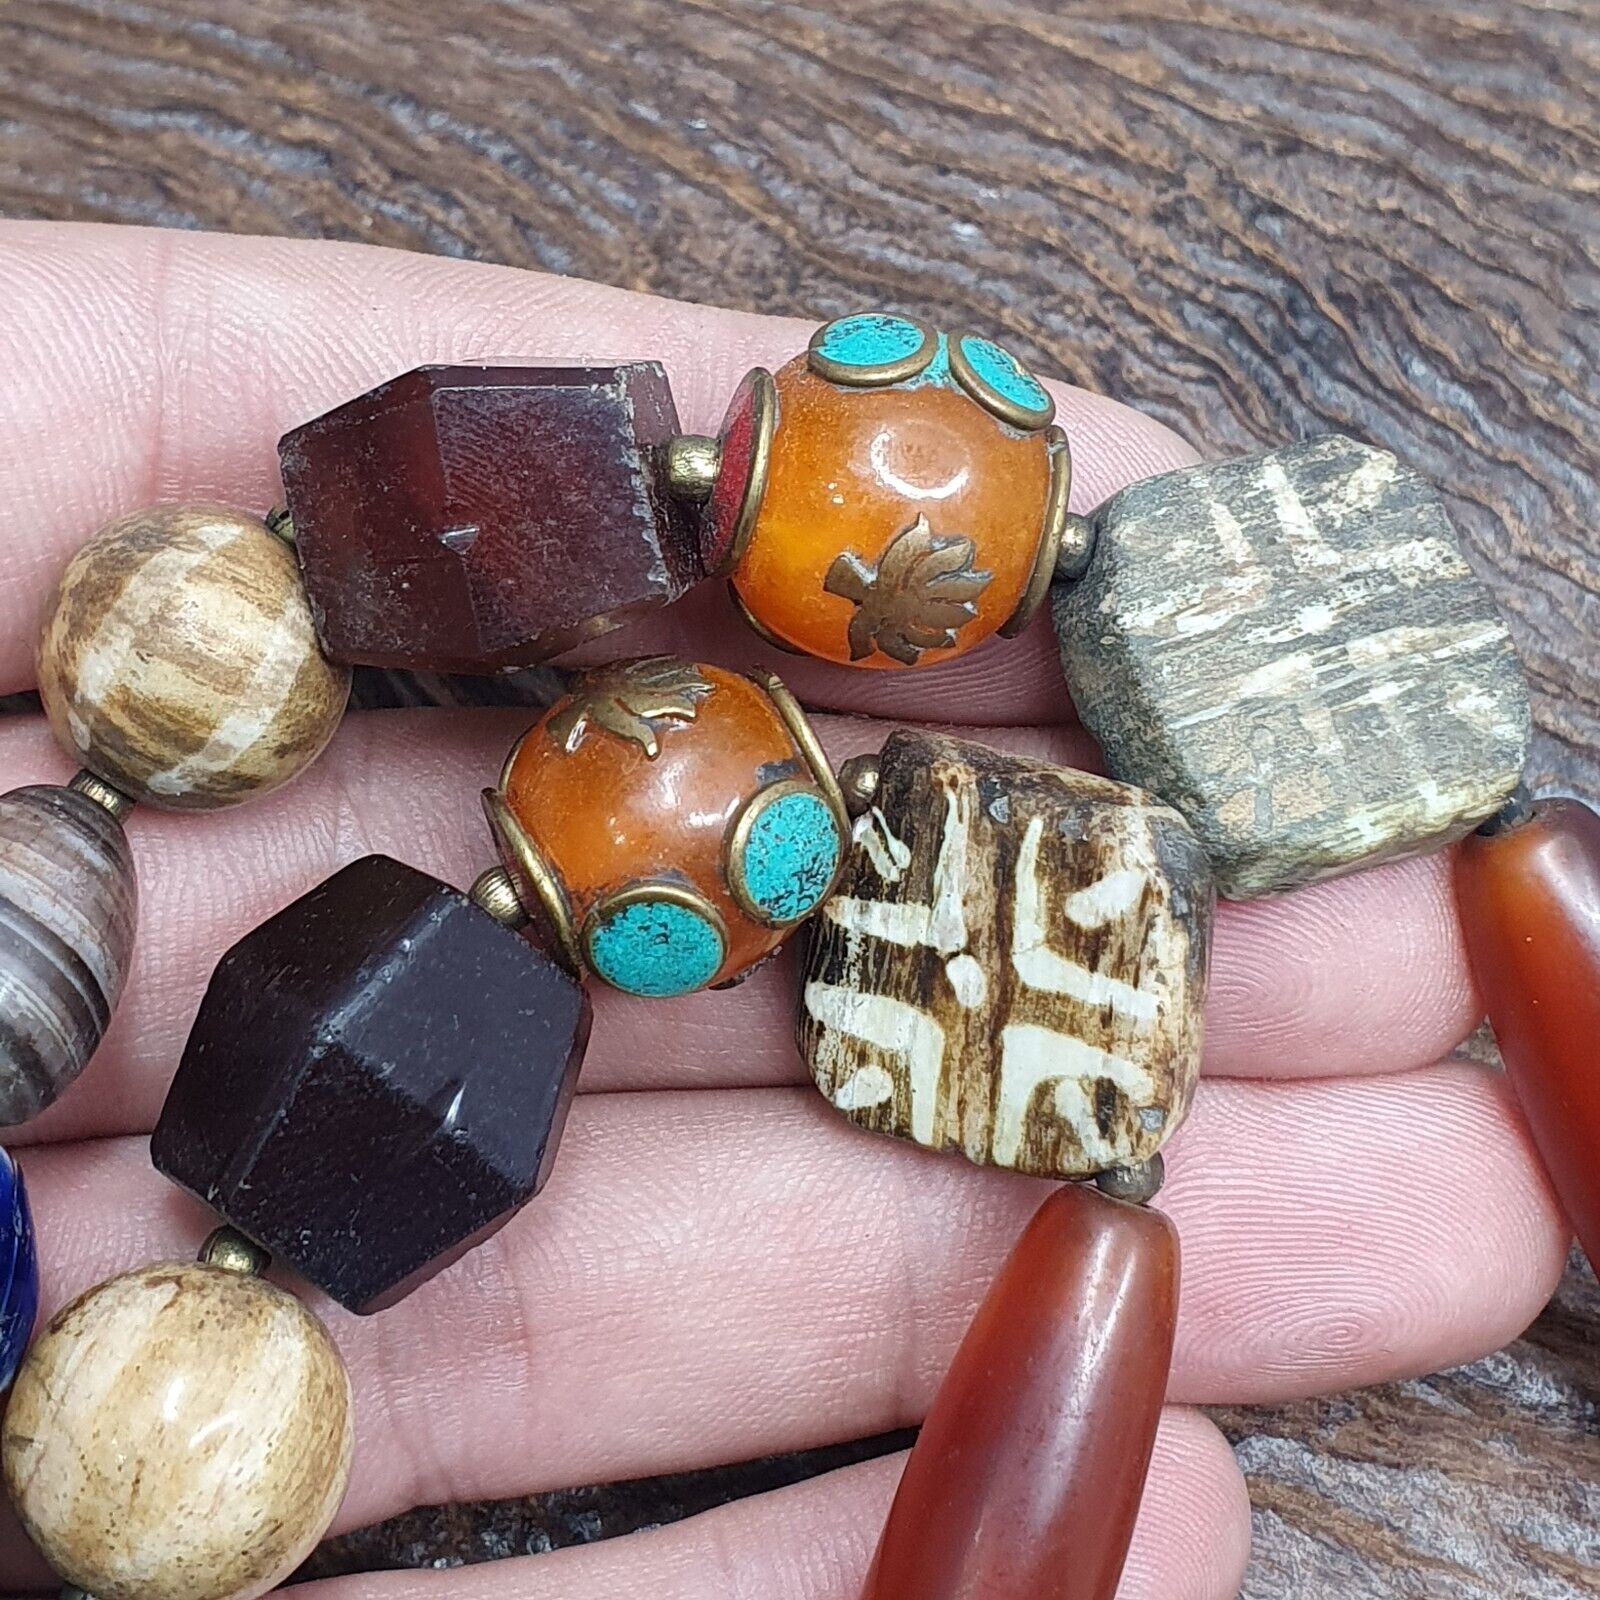 Vintage African beads Chevron Glass, Pumtek, Agate And Nepal pendant Necklace